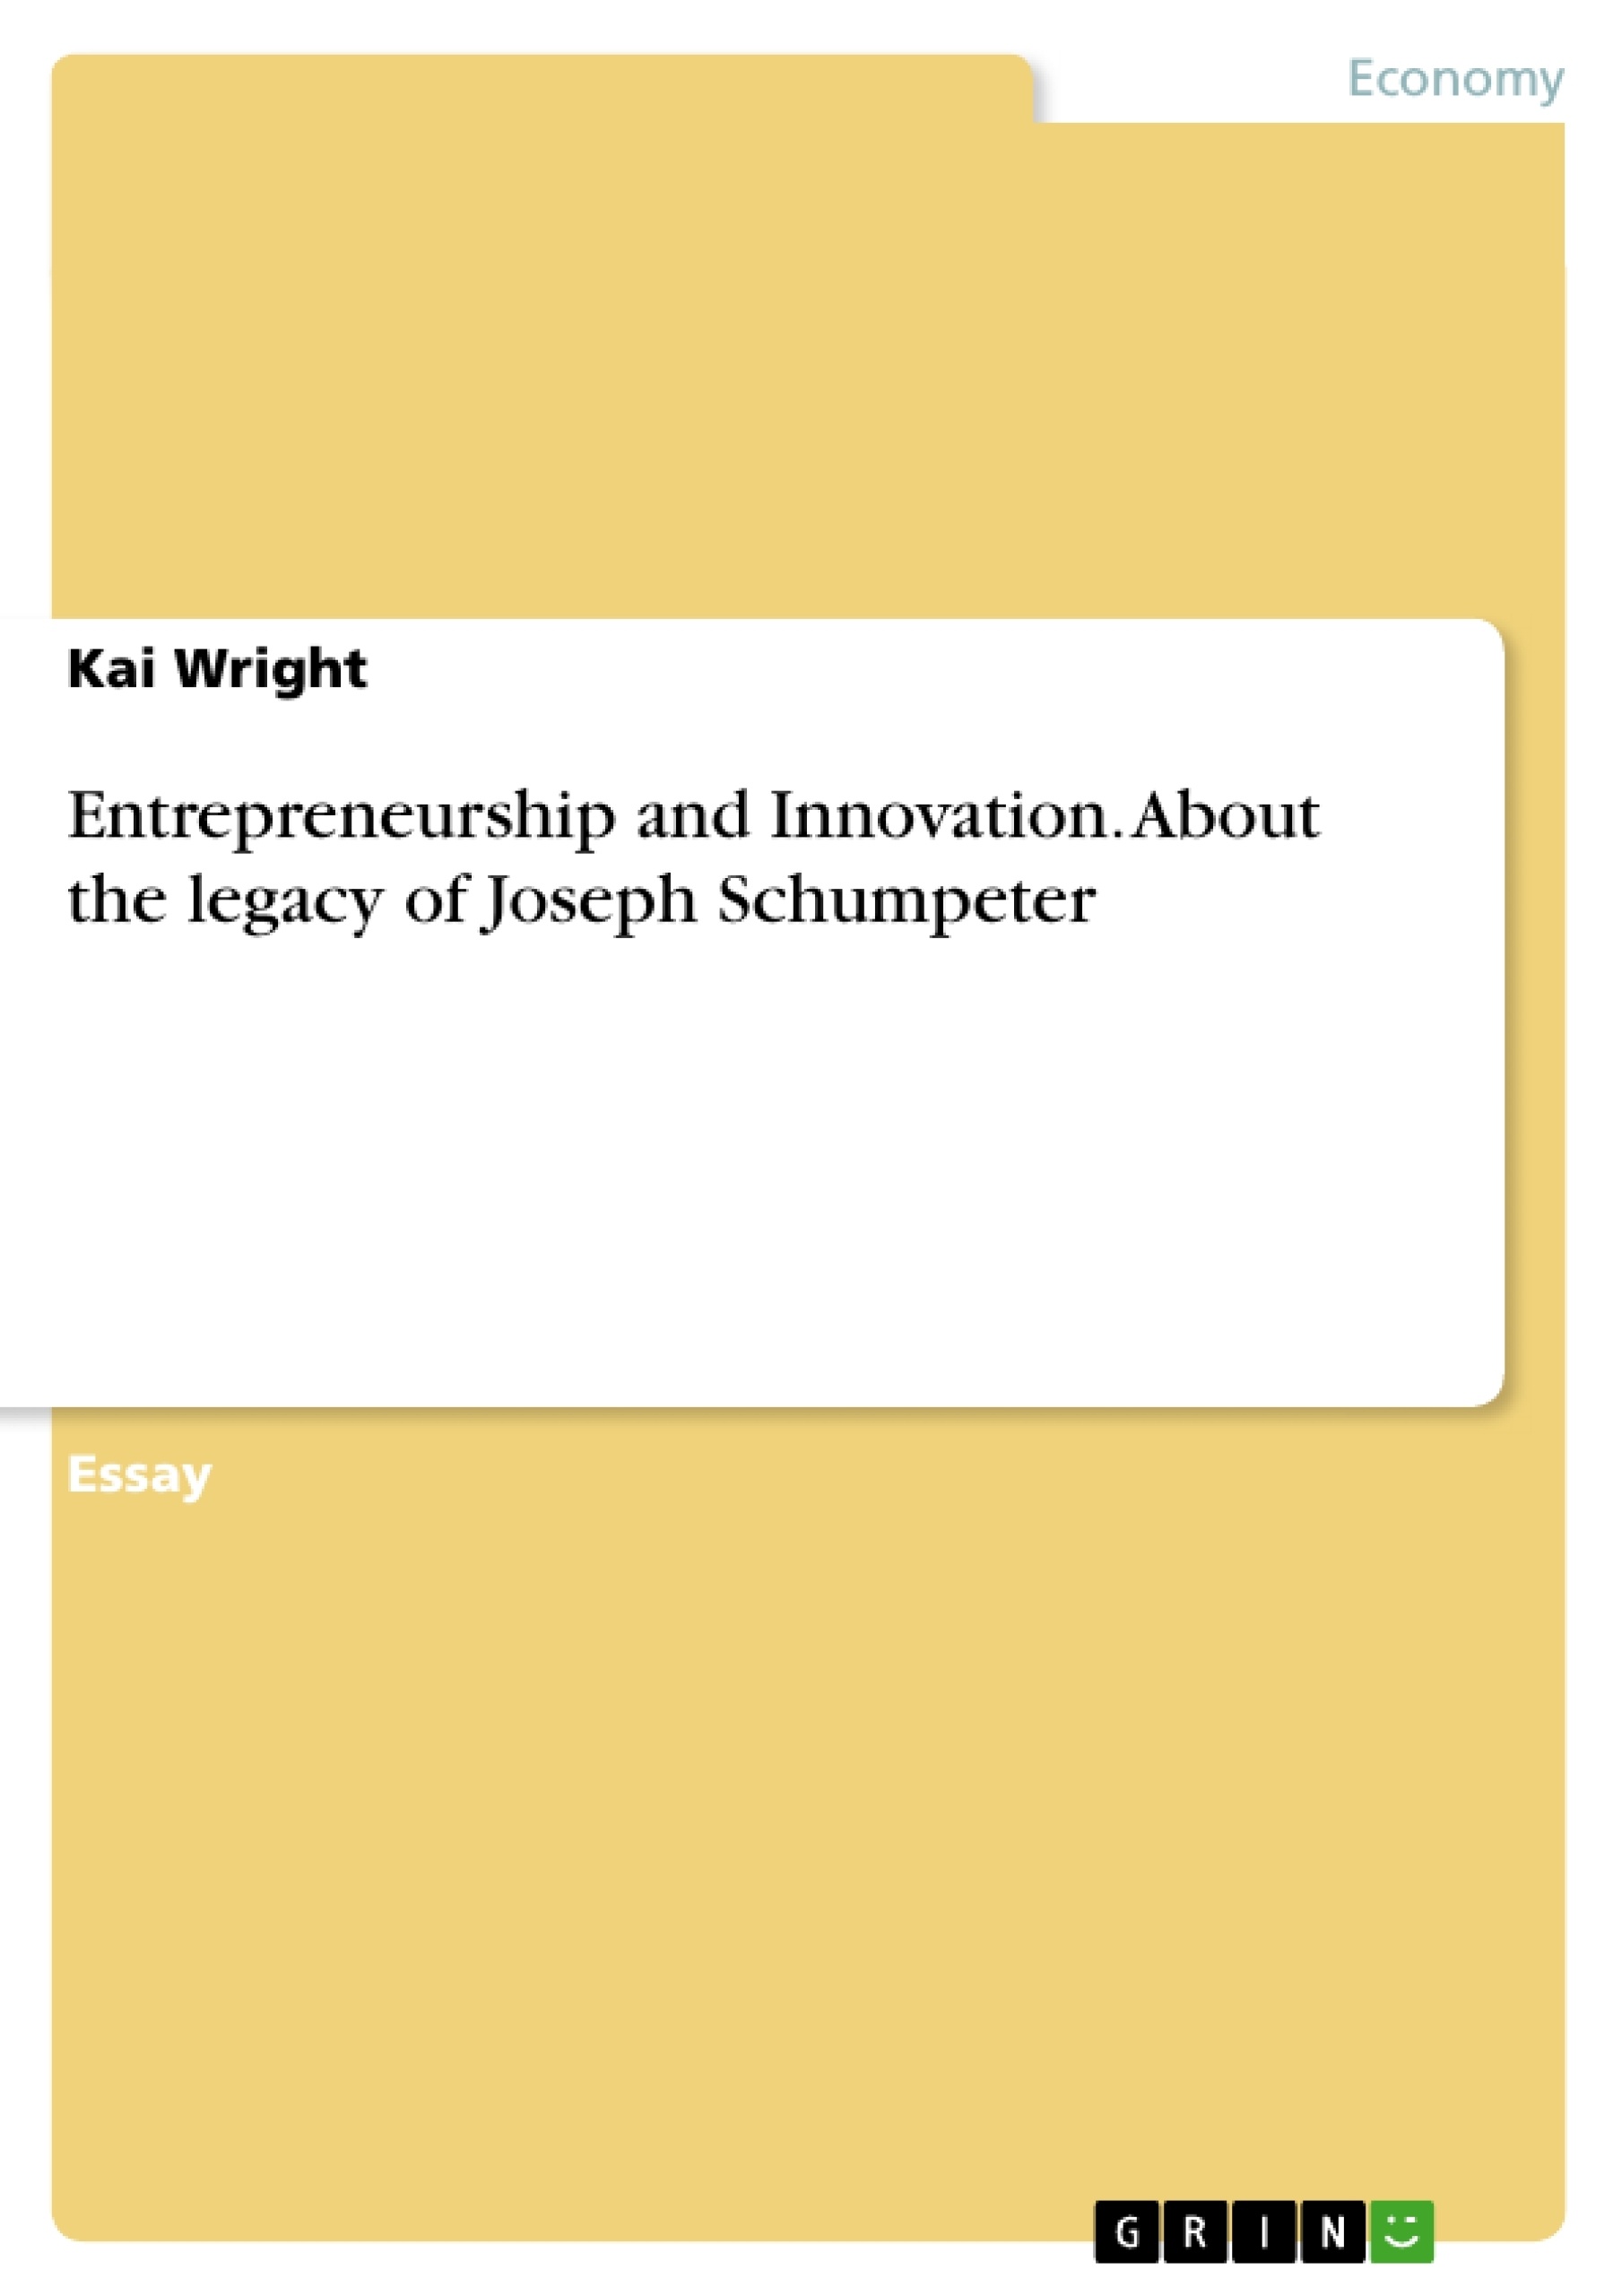 Título: Entrepreneurship and Innovation. About the legacy of Joseph Schumpeter